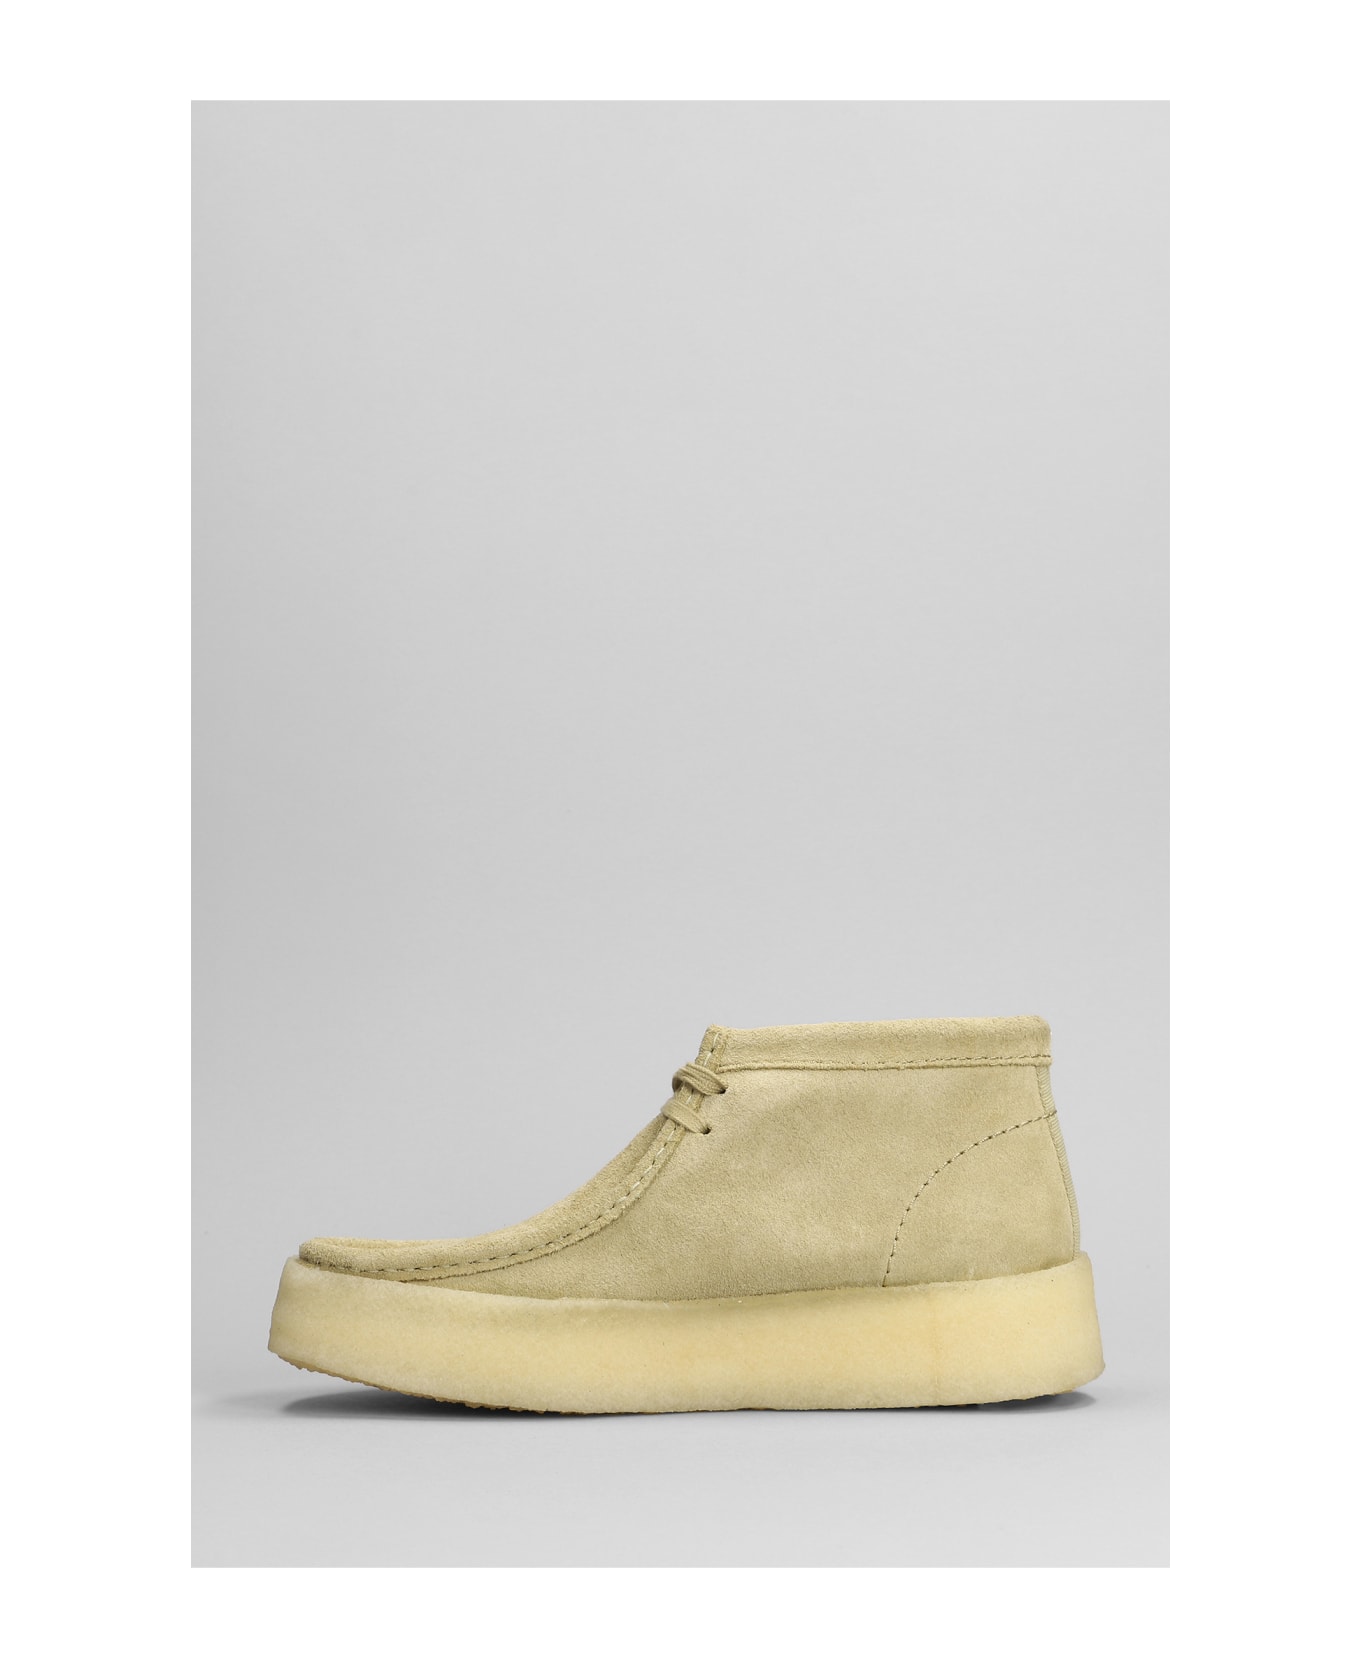 Clarks Wallabee Cup Lace Up Shoes In Beige Suede - beige